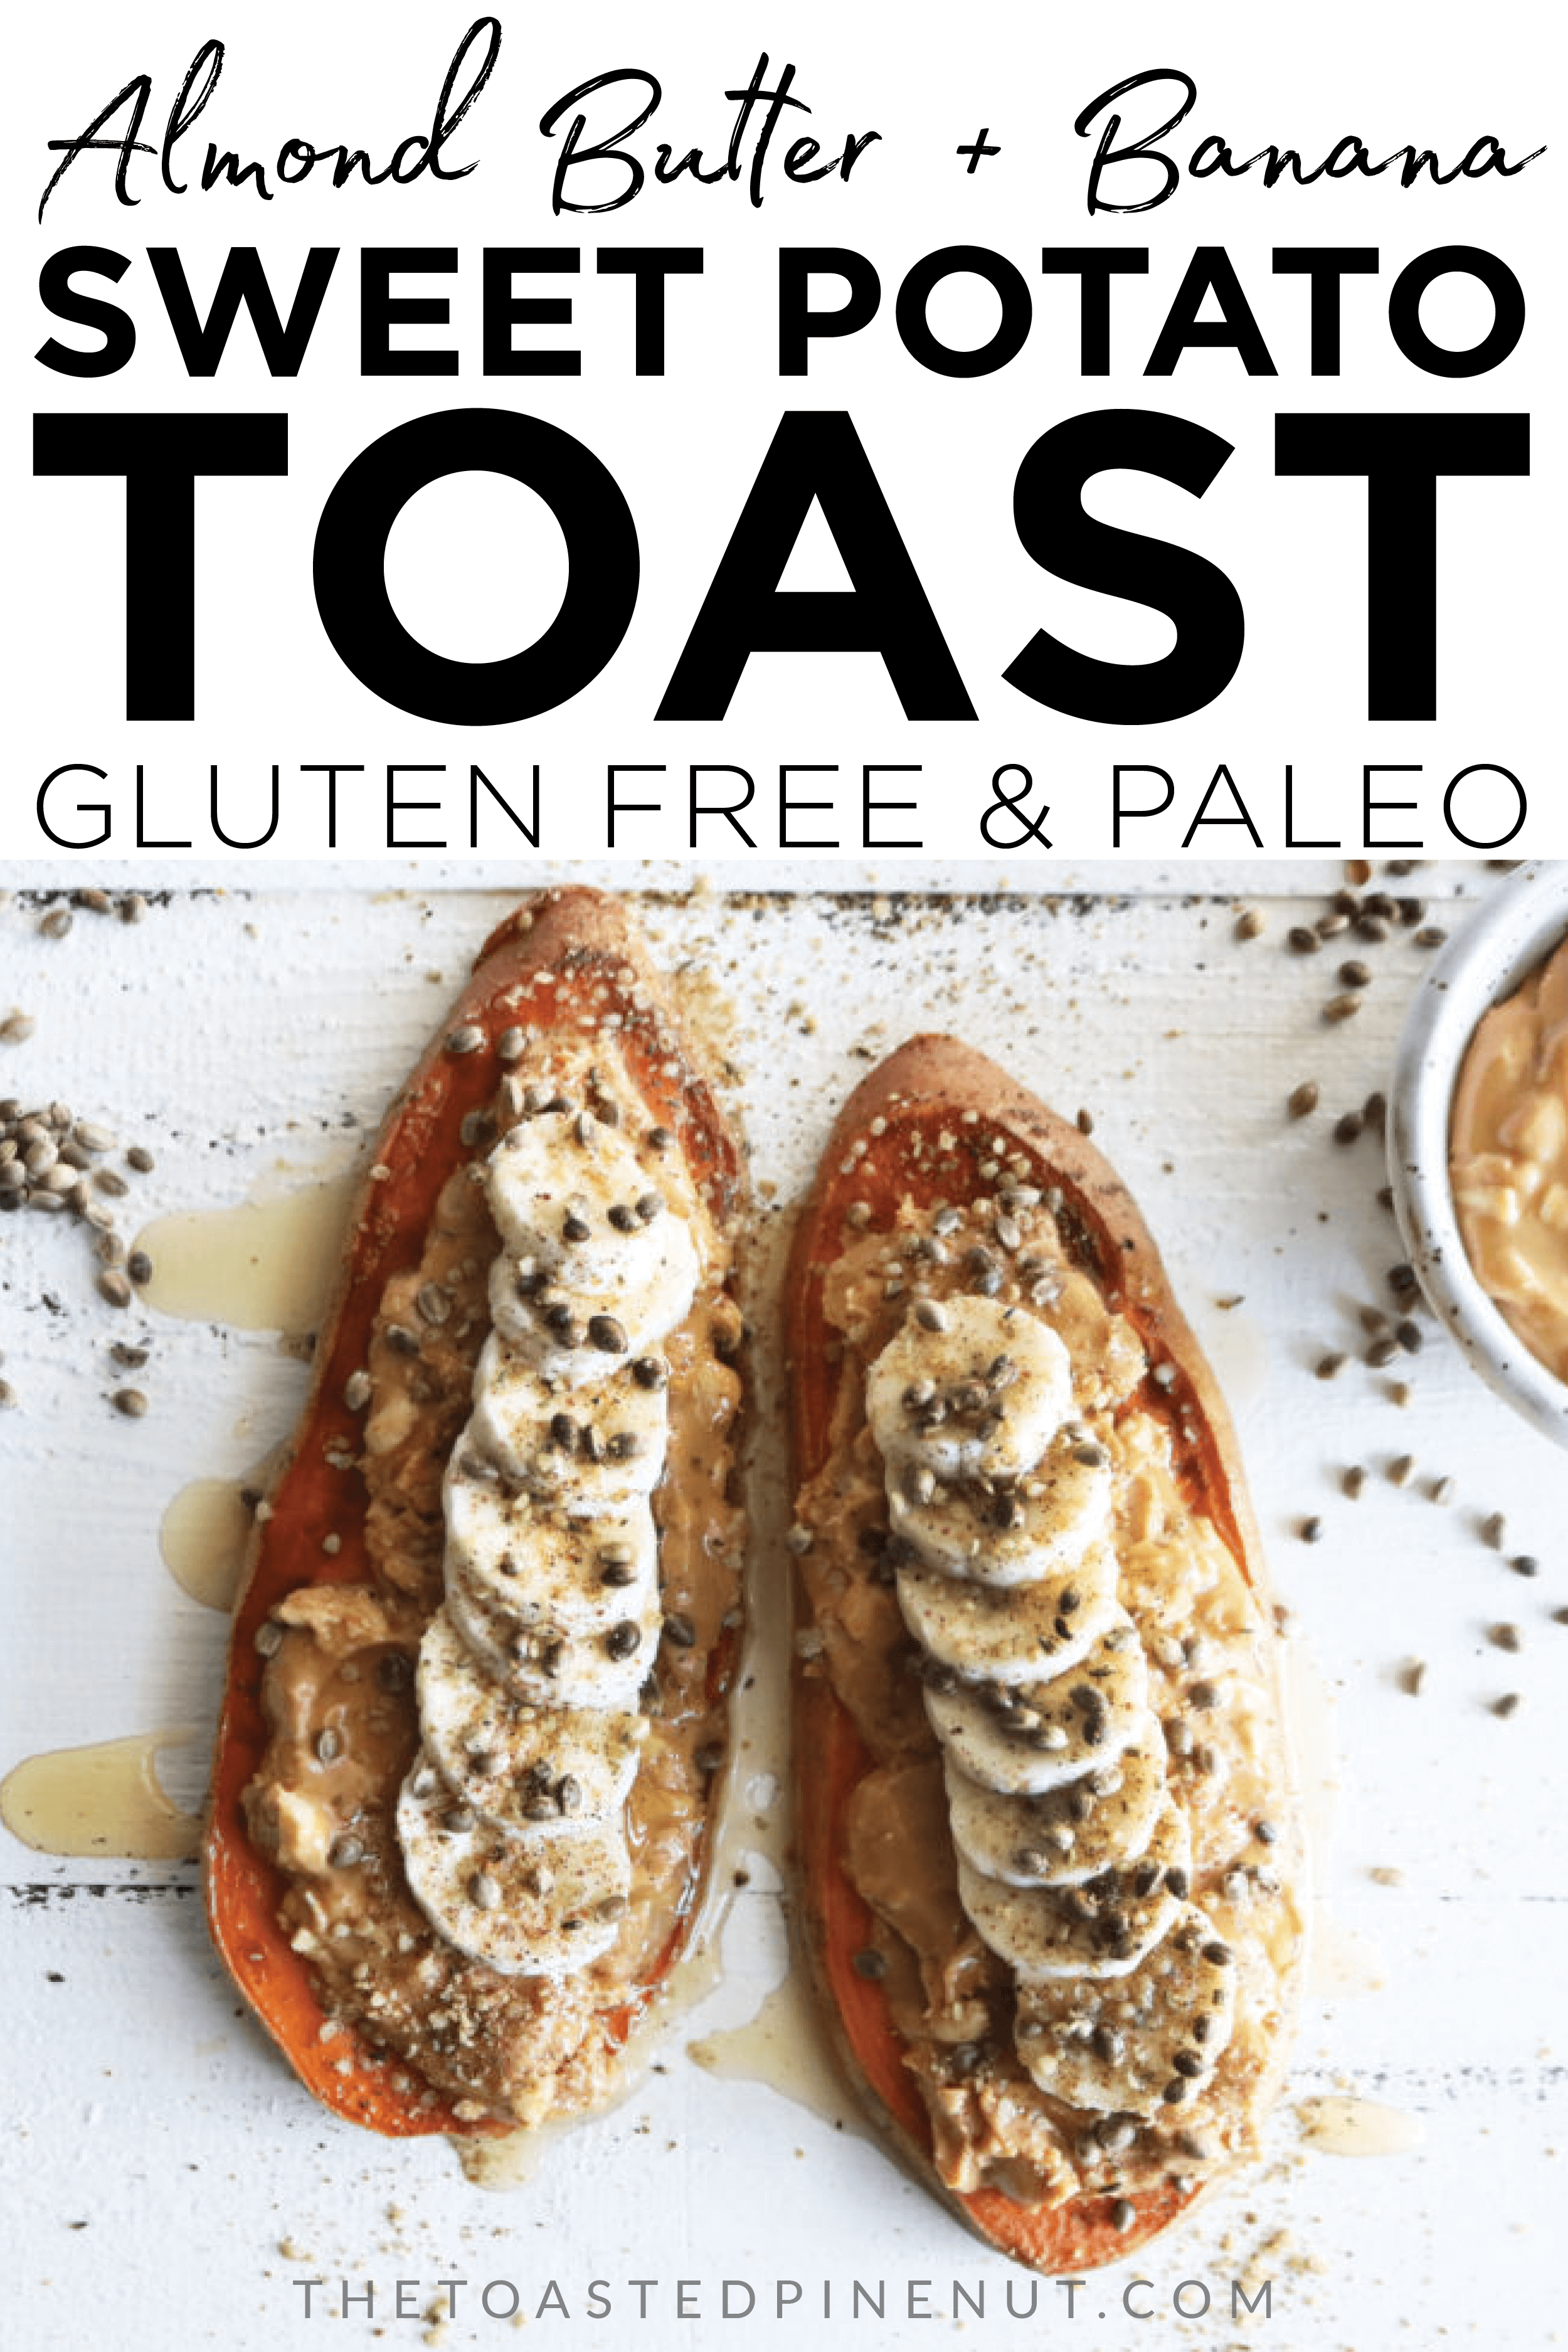 Fun and delicious way to up your #toasttuesday game! This Loaded Almond Butter + Banana Sweet Potato Toast is such a tasty way to start your day! thetoastedpinenut.com #thetoastedpinenut #sweetpotato #sweetpotatotoast #glutenfree #almondbutter #paleo